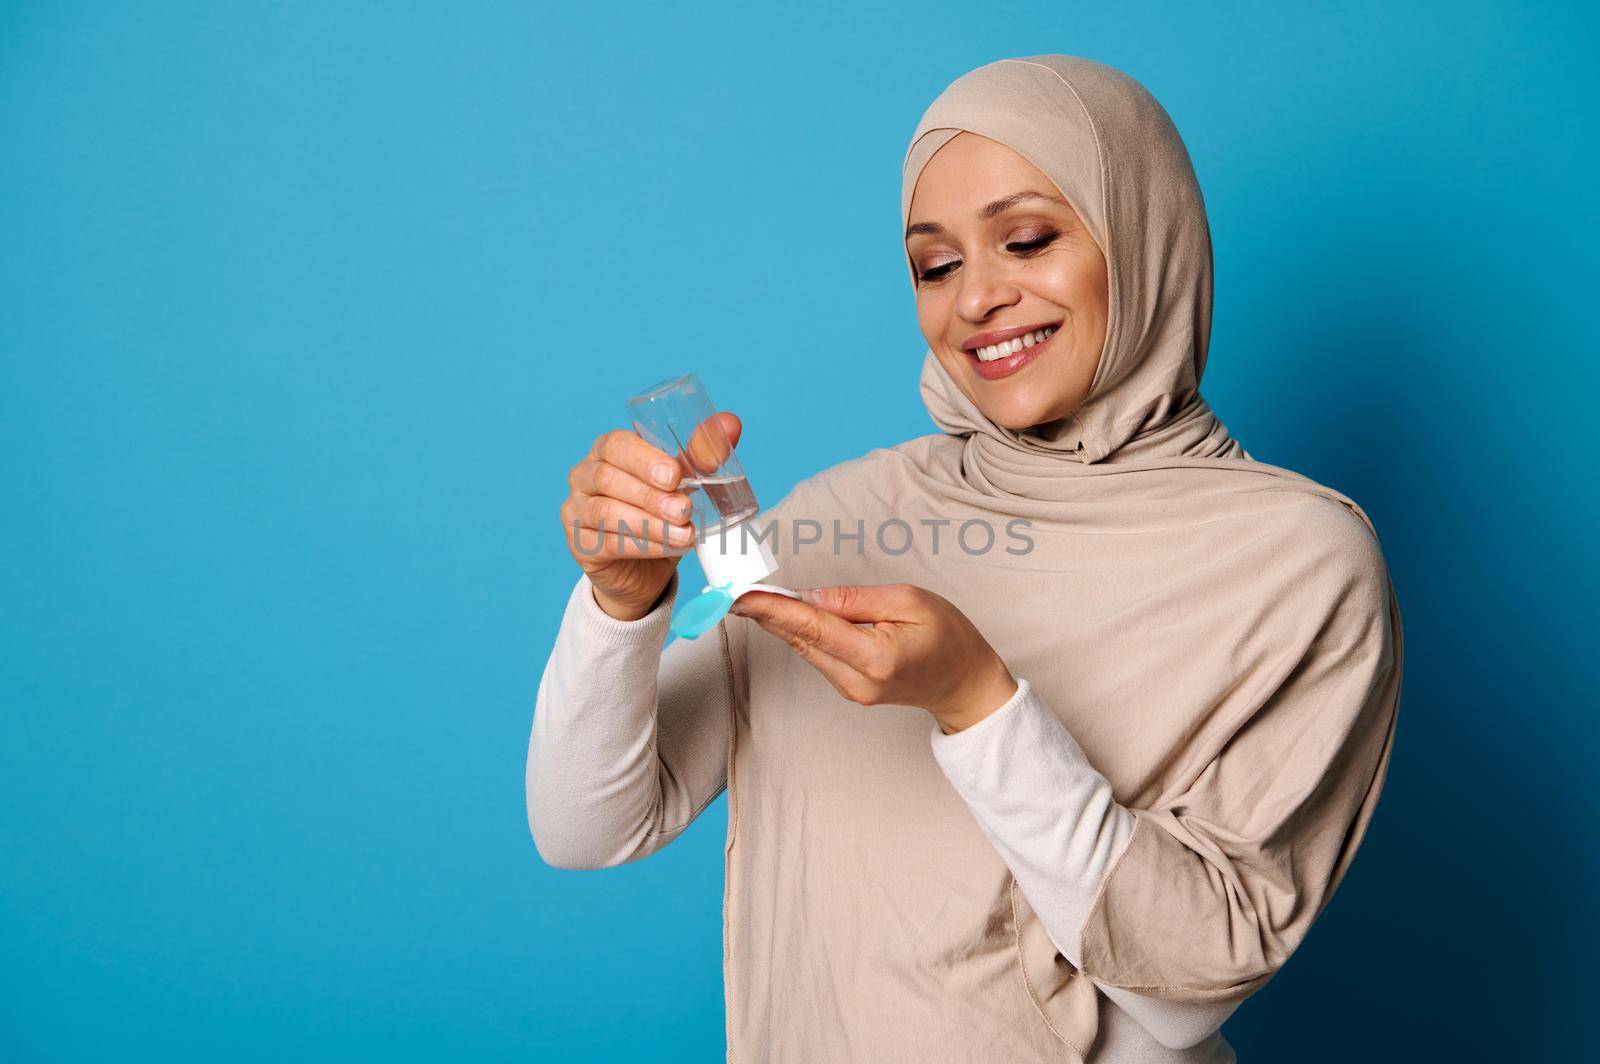 Smiling muslim woman wearing beige hijab applying micellar makeup lotion to cotton pad. Blue background, copy space by artgf